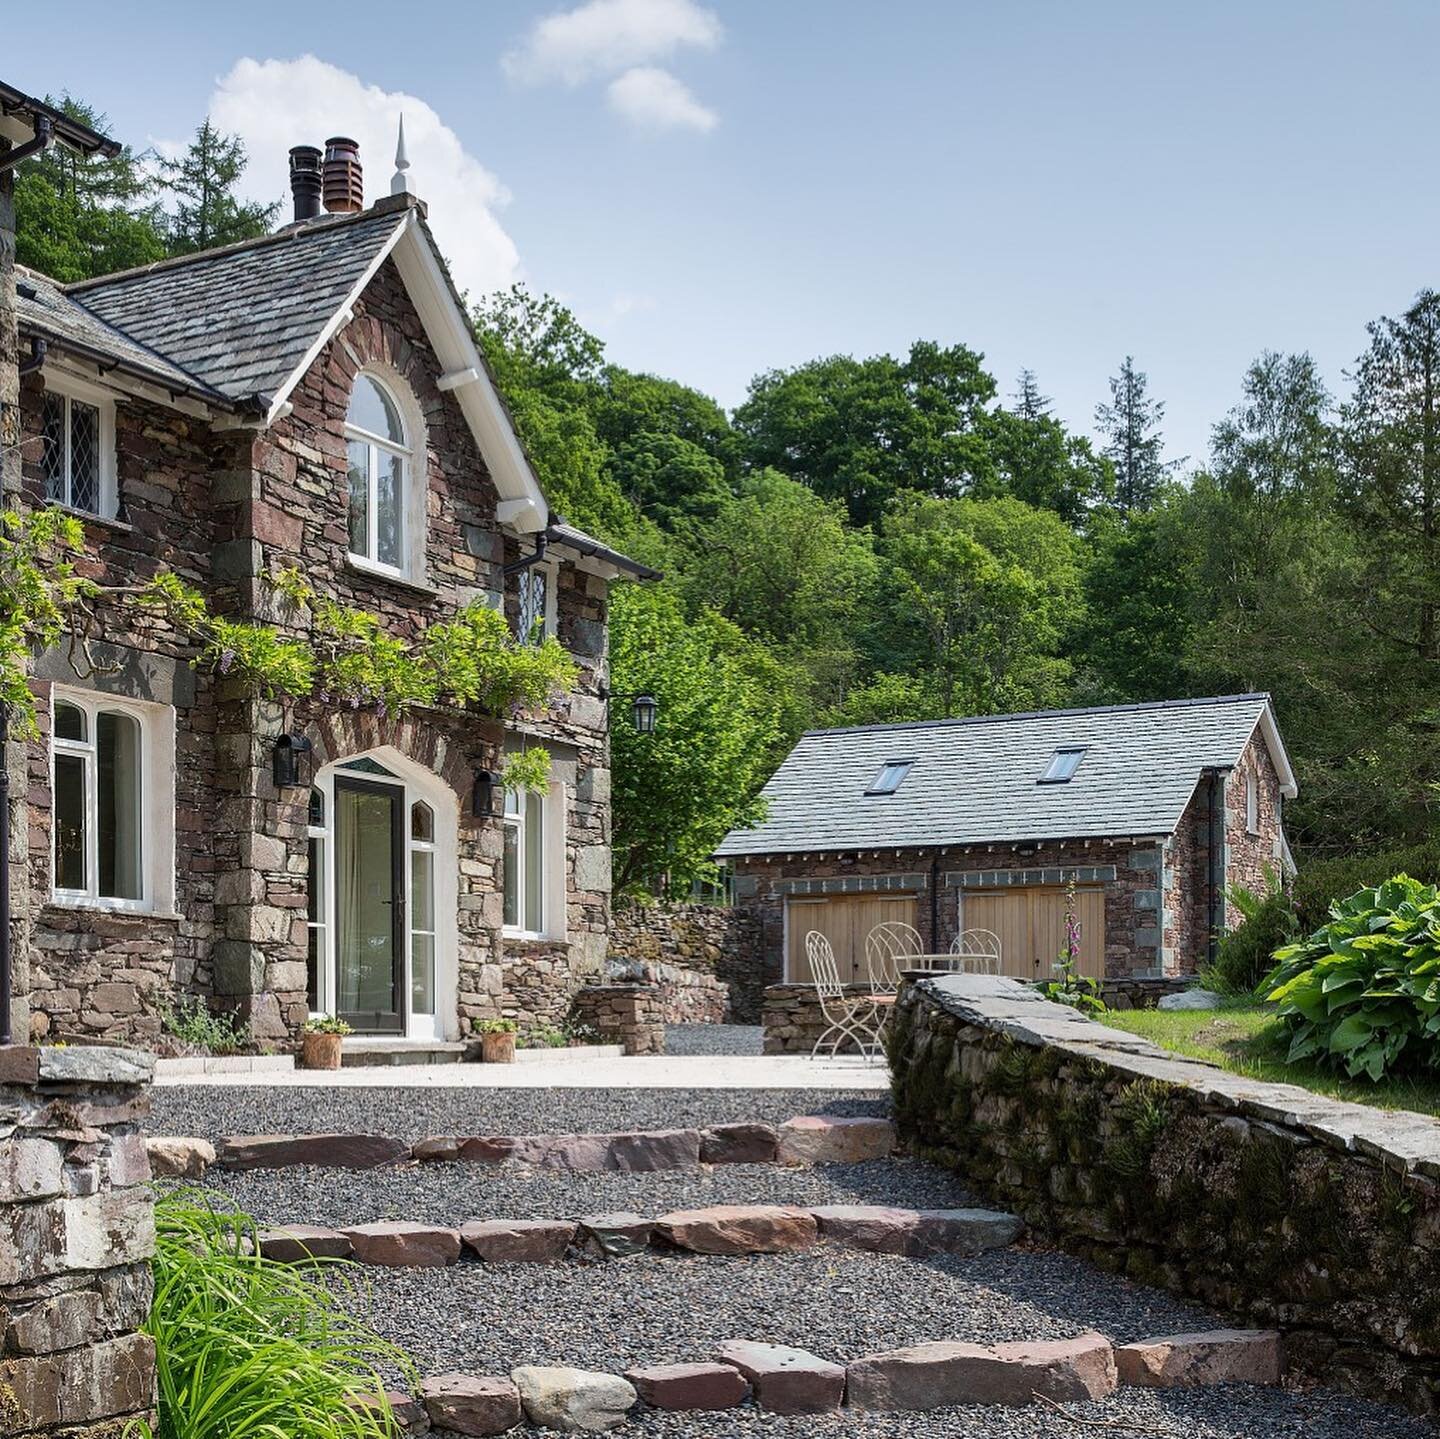 Kitty Crag
A complete renovation of a delightful #lakedistrict property, including a new kitchen, family dining and loft conversion - and not forgetting a rather special double garage with home office and studio above!
.
.
Photograph by Tony West
.
#